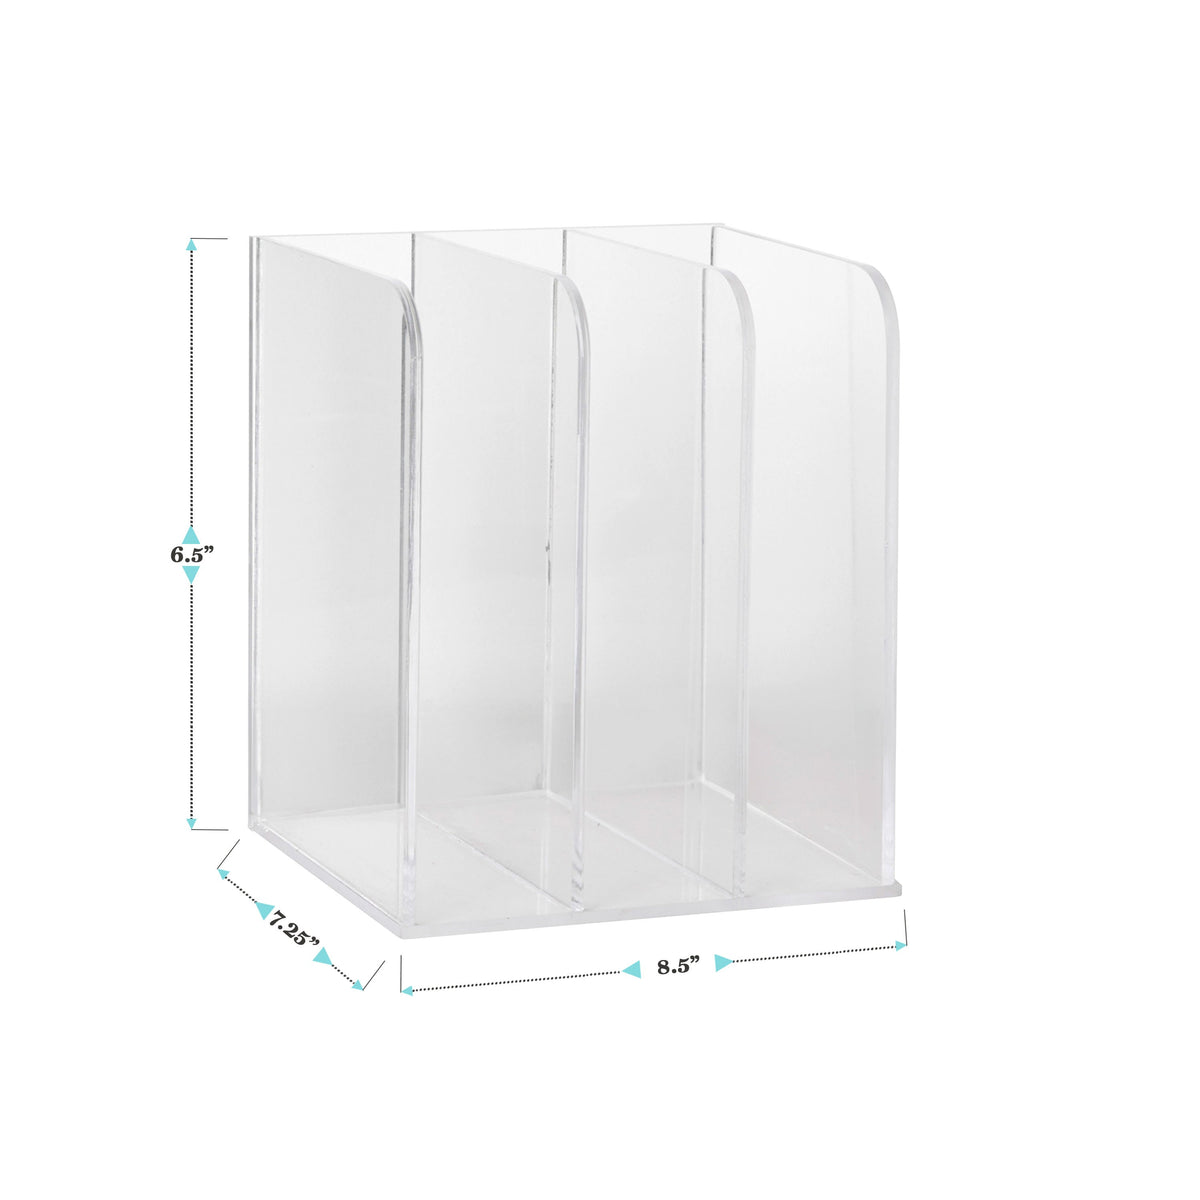 Premium Acrylic 3 Section Desktop File Holder with Anti-Slip Feet - Clear